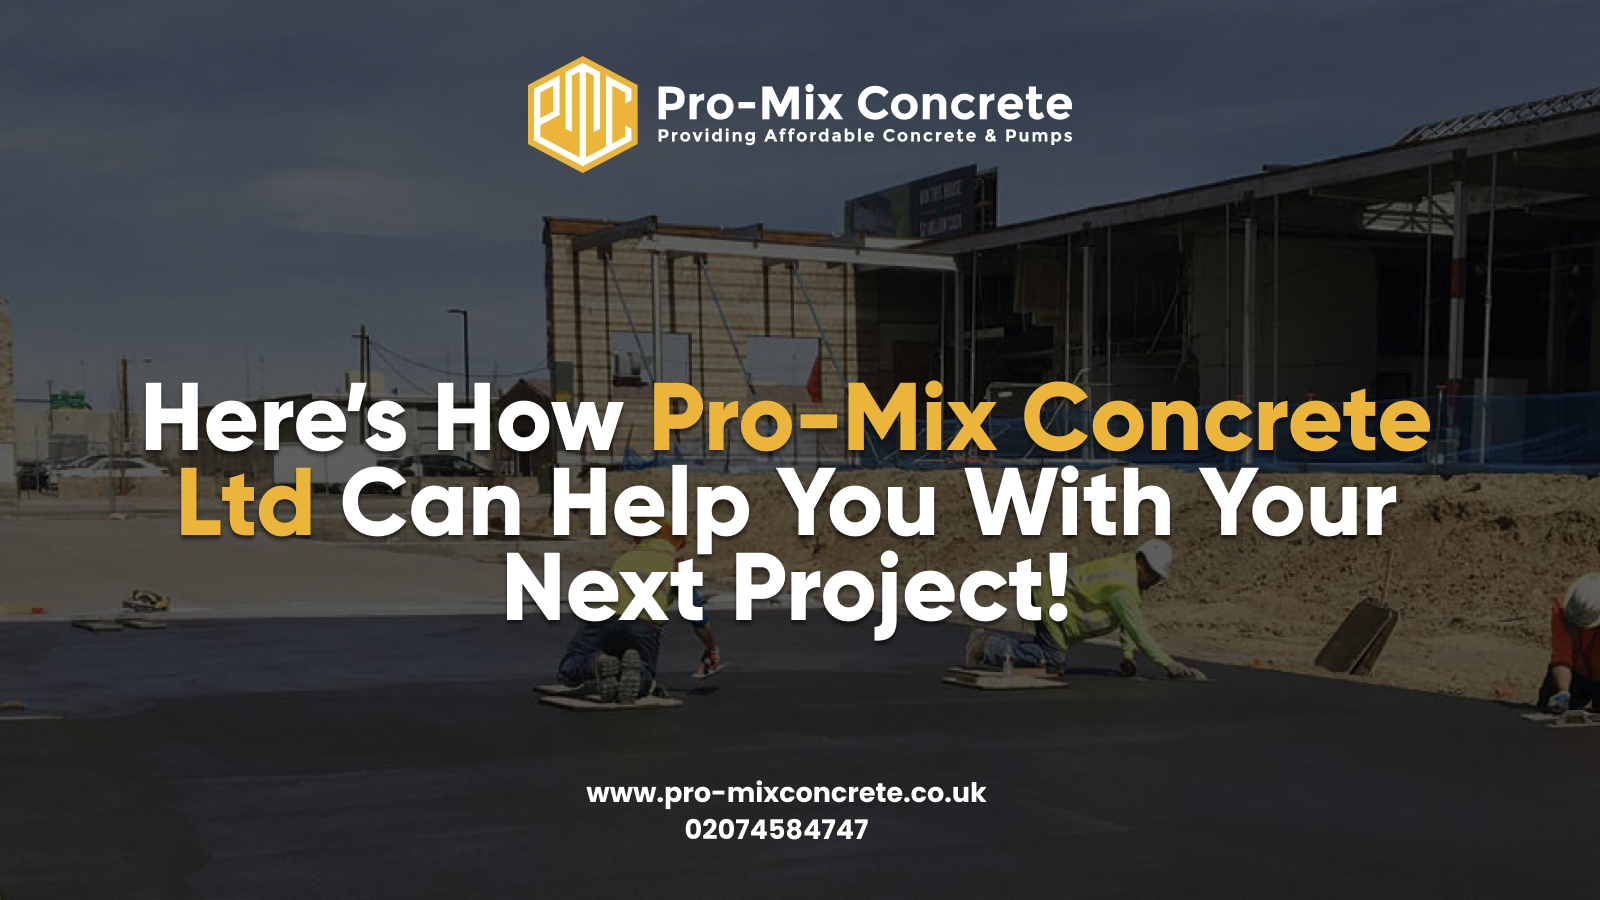 Here’s How Pro-Mix Concrete Ltd Can Help You With Your Next Project!